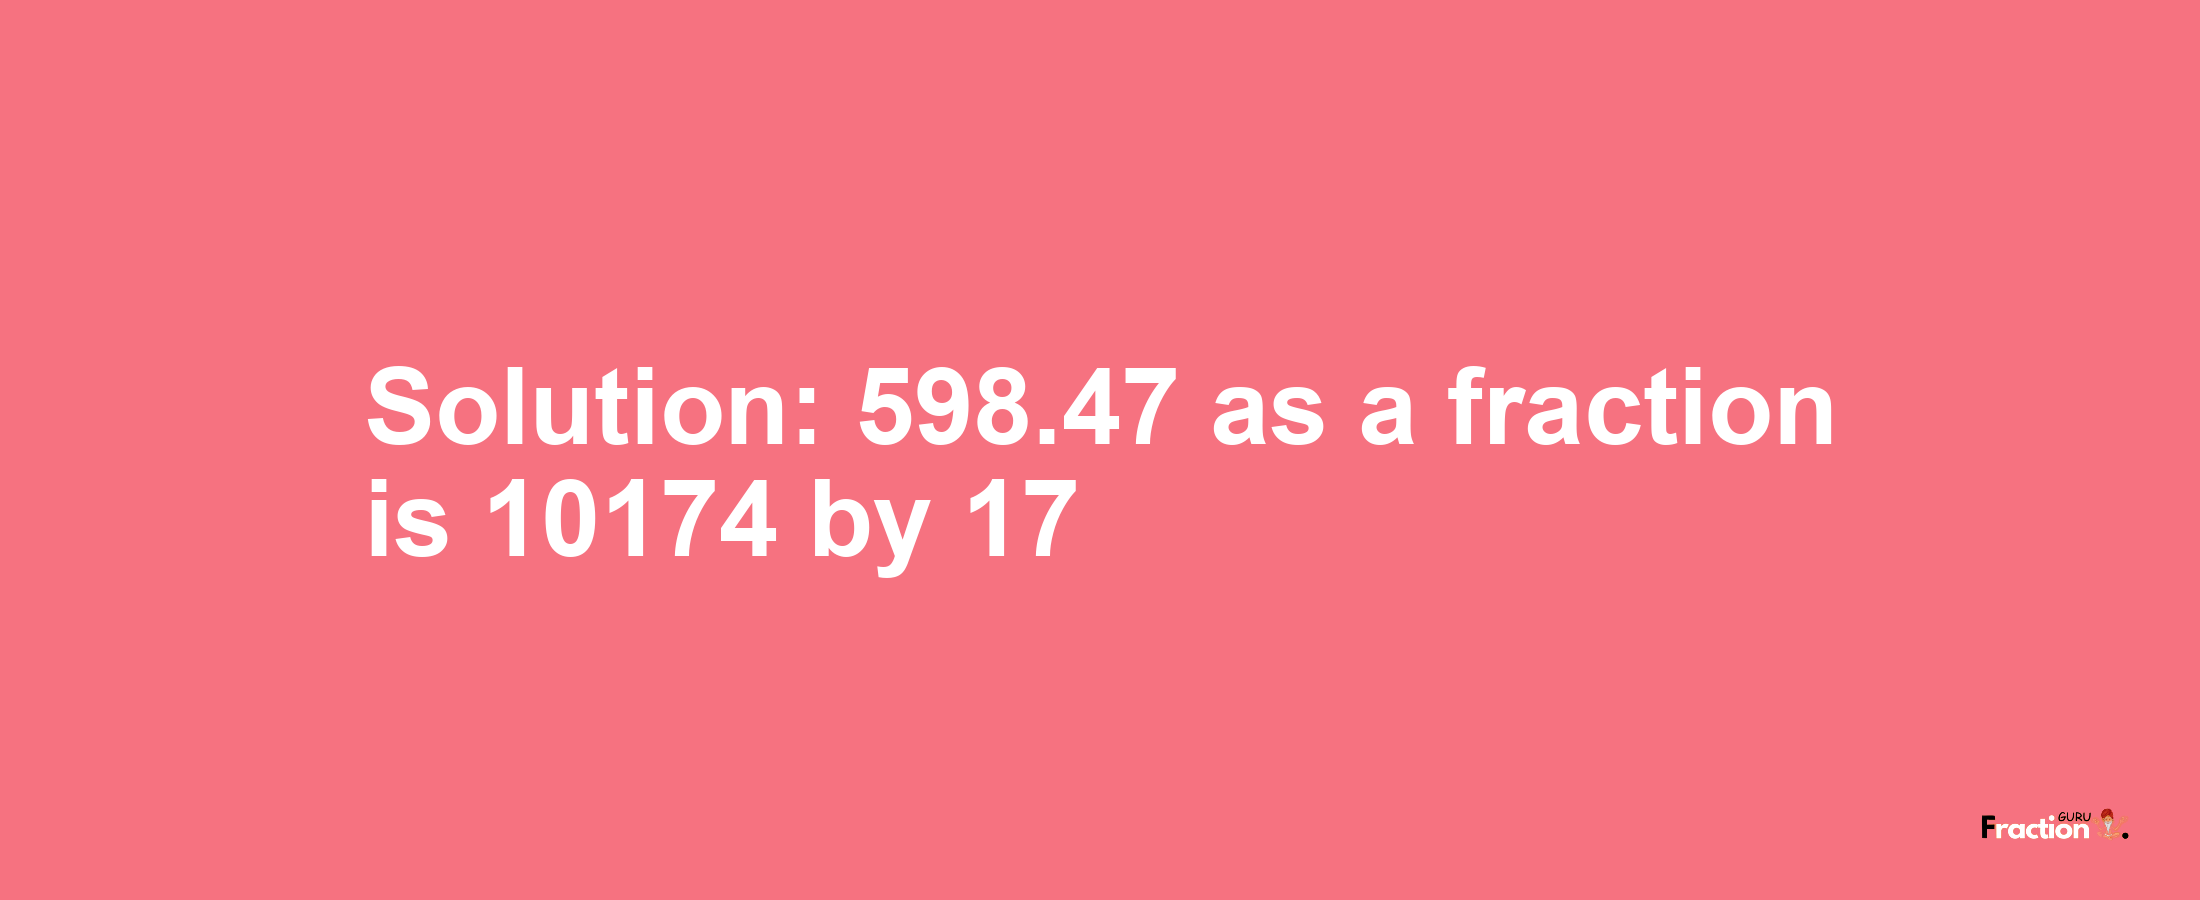 Solution:598.47 as a fraction is 10174/17